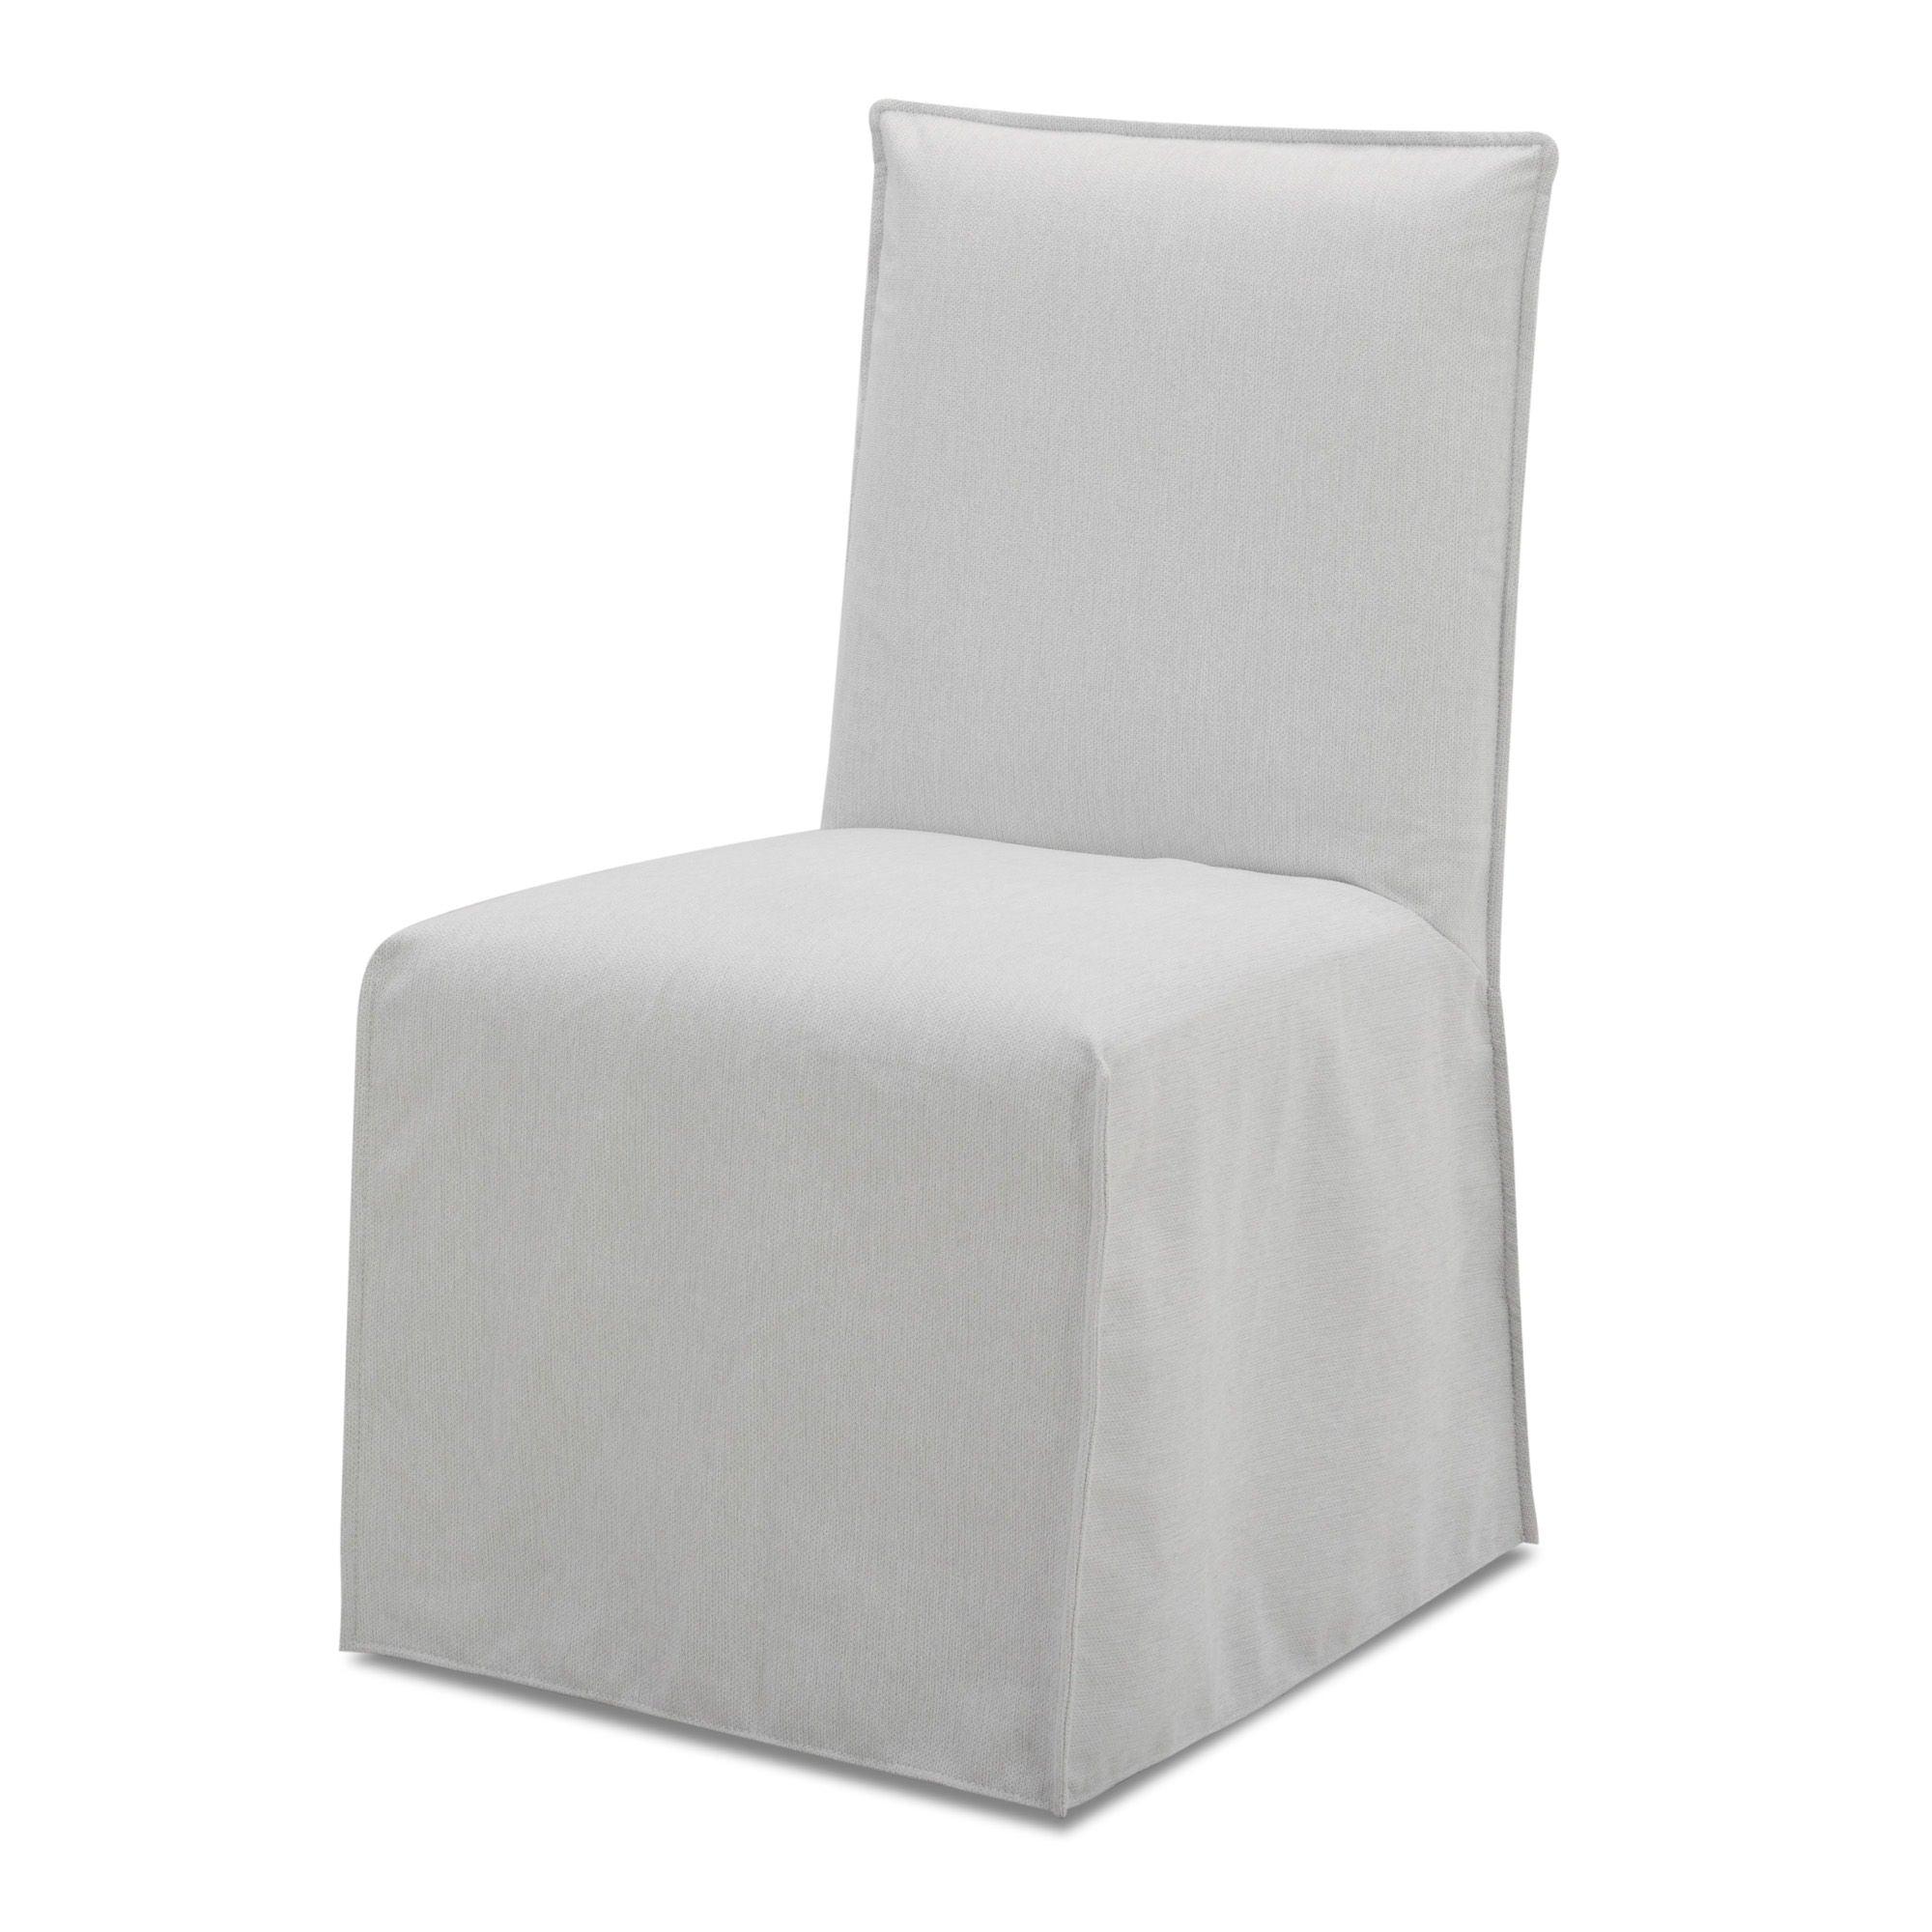 Parker House - Sierra - Dining Chair (Set of 2) - Mathis Ivory - 5th Avenue Furniture